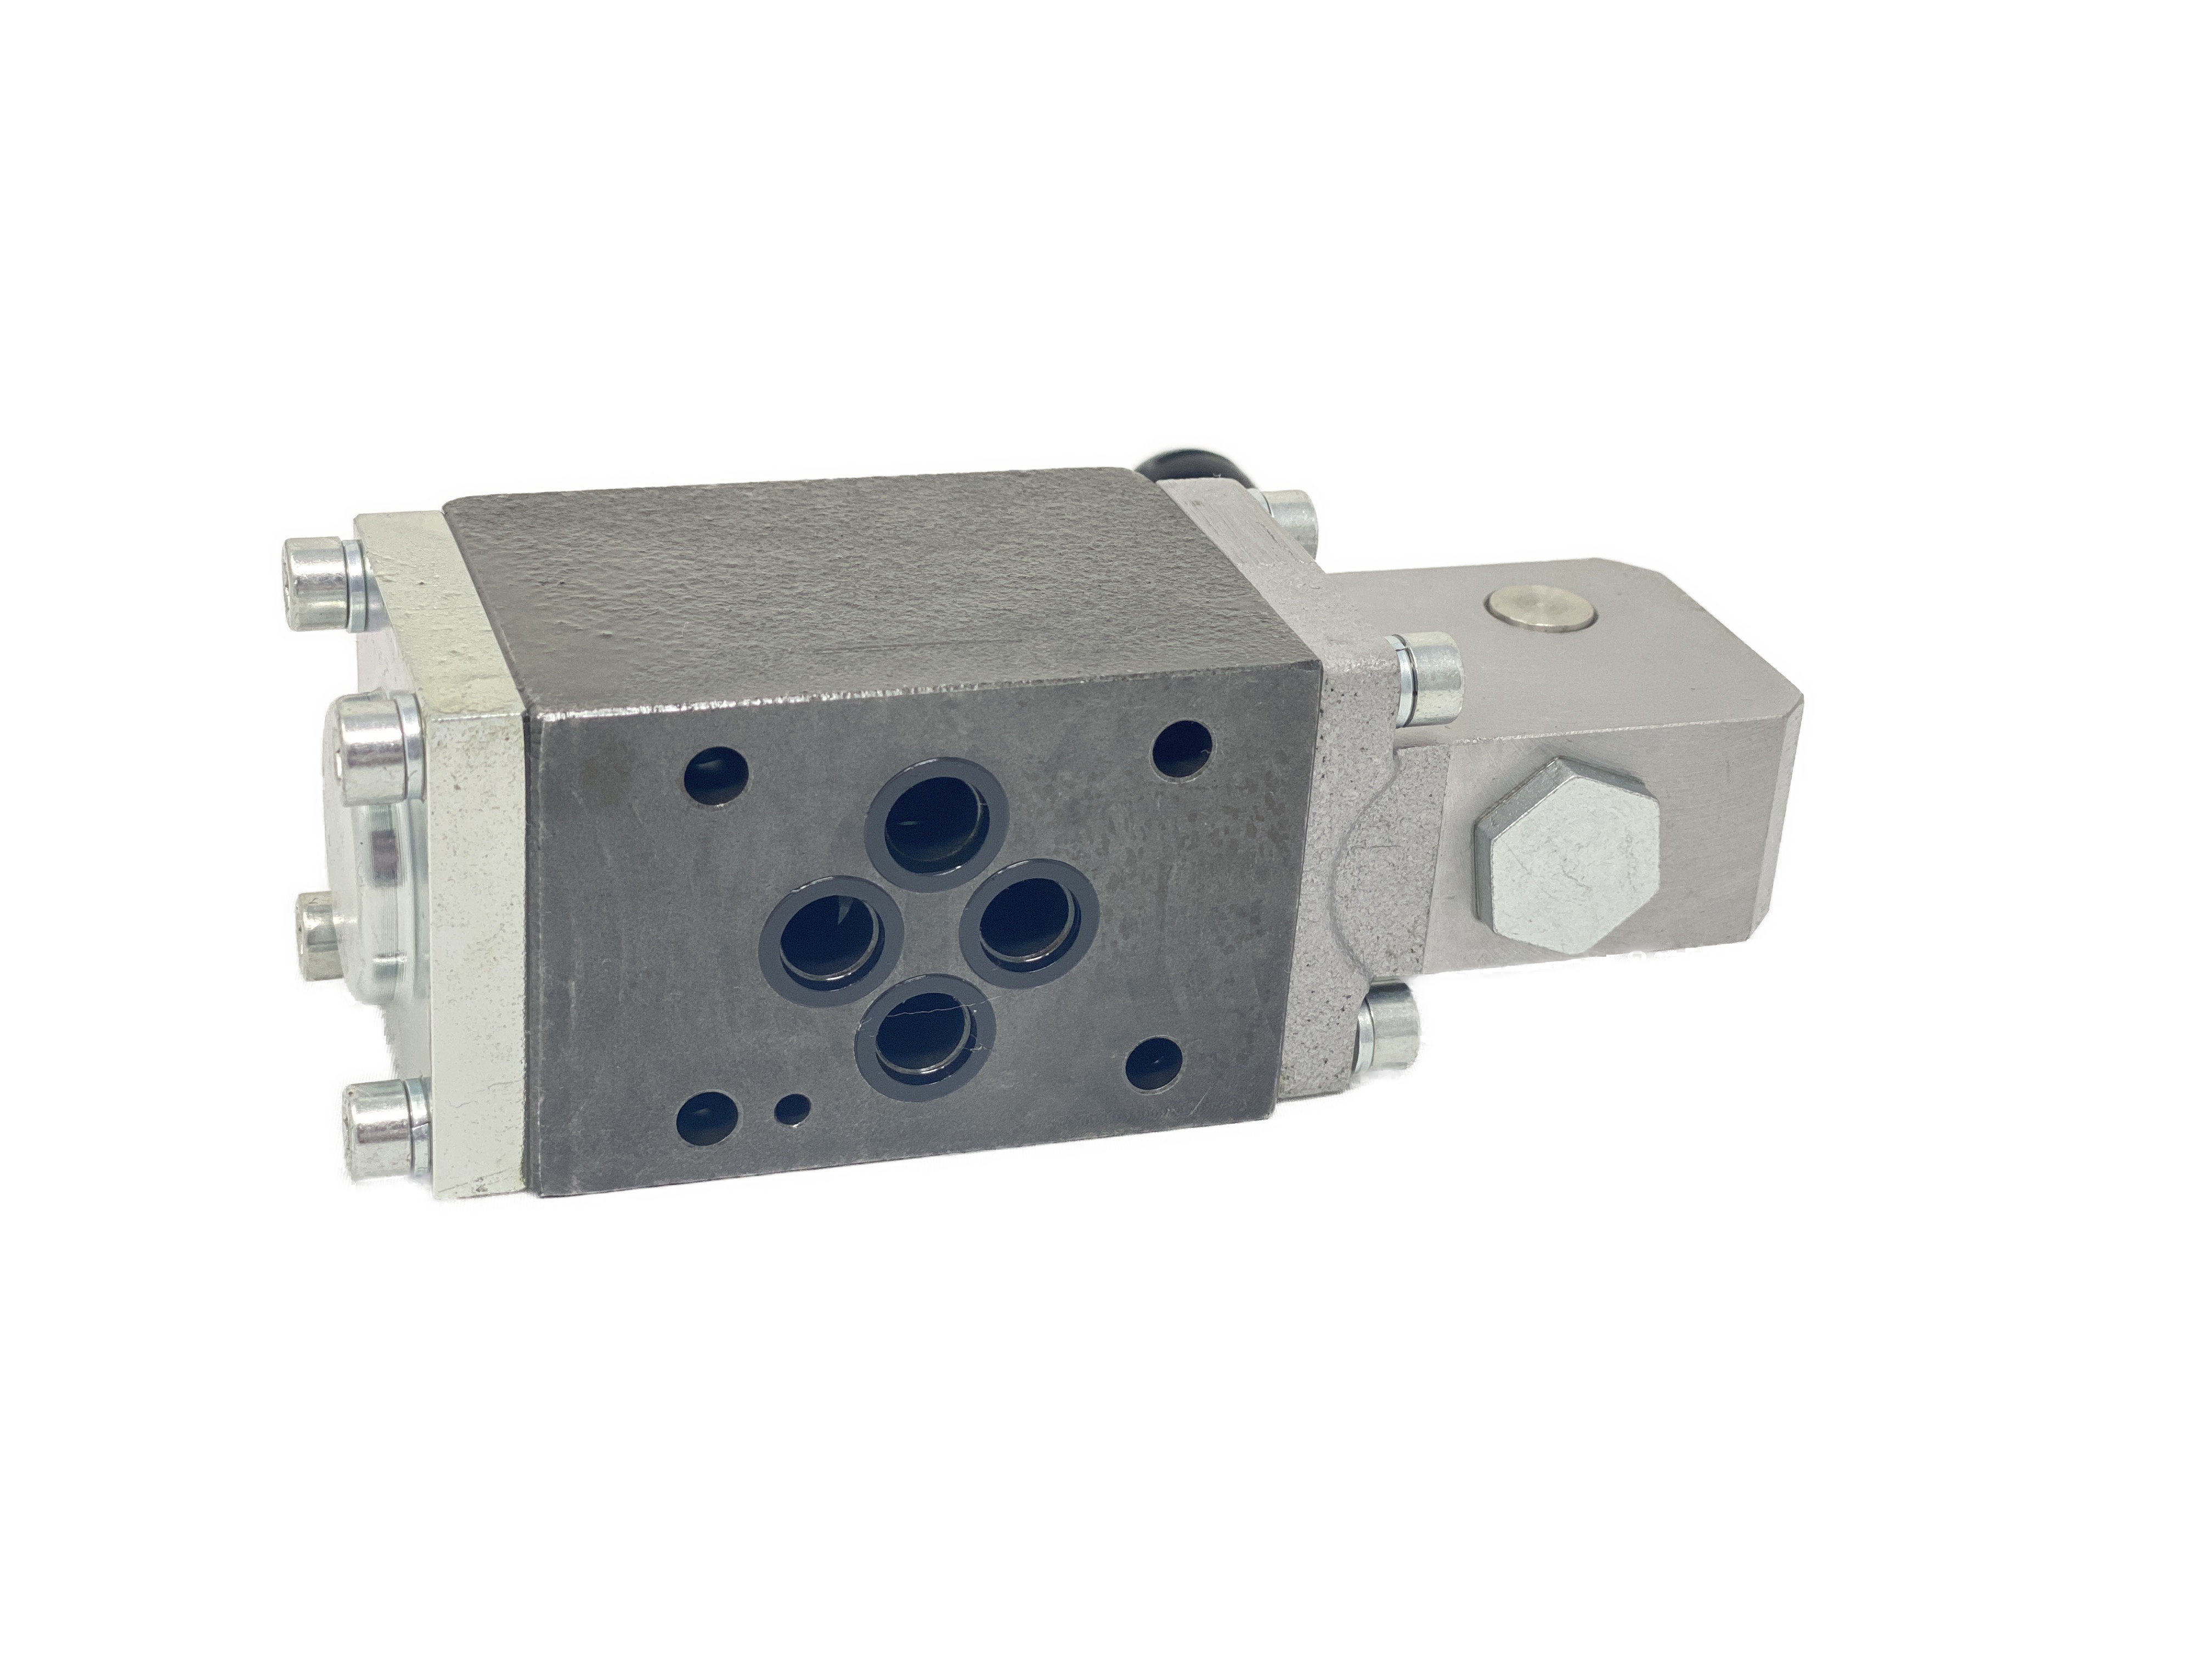 RPR3-062Z11/A1 : Argo Hytos Directional Control Valve, Lever Operated, D03 (NG6), 21GPM, 5100psi, 2P4W, Spring Return, All Ports Blocked in Neutral